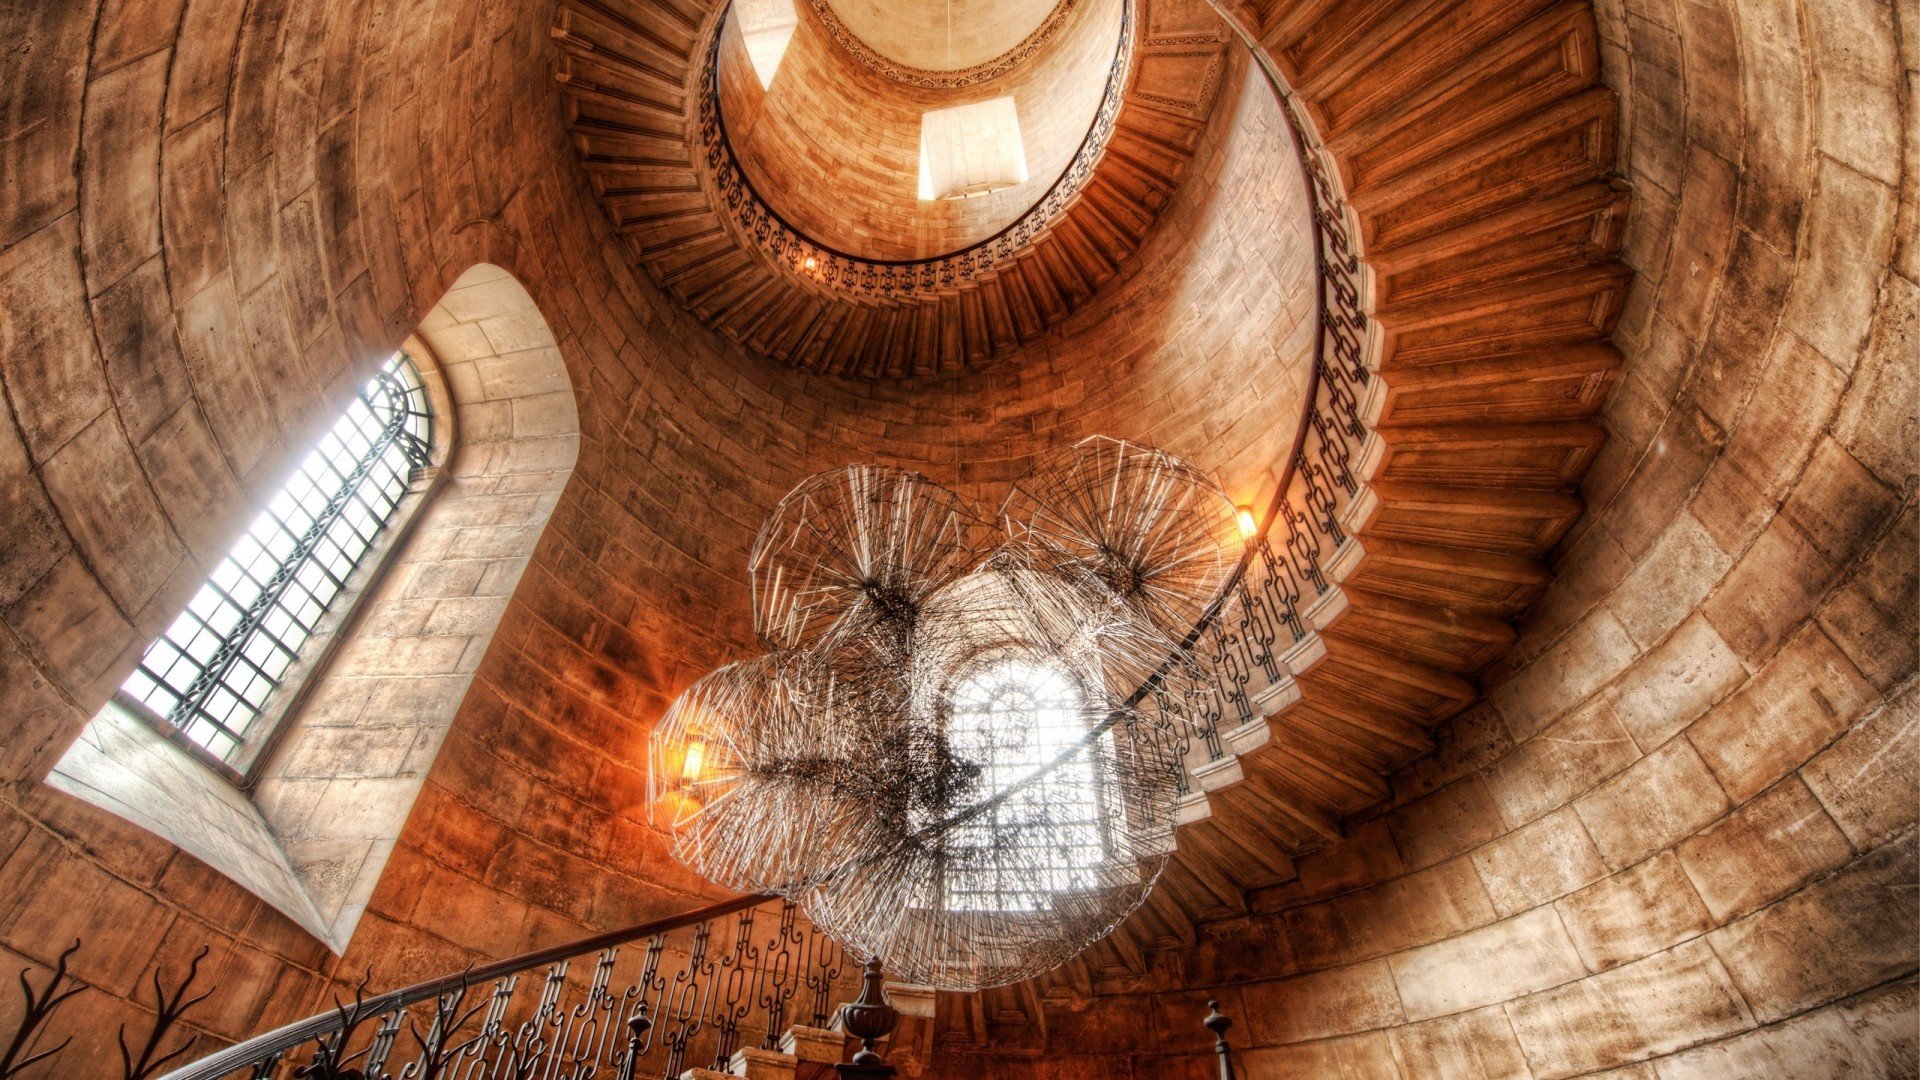 interior, Sunlight, HDR, Staircase, Tower, Bricks, Window, Ancient, Chandeliers Wallpaper